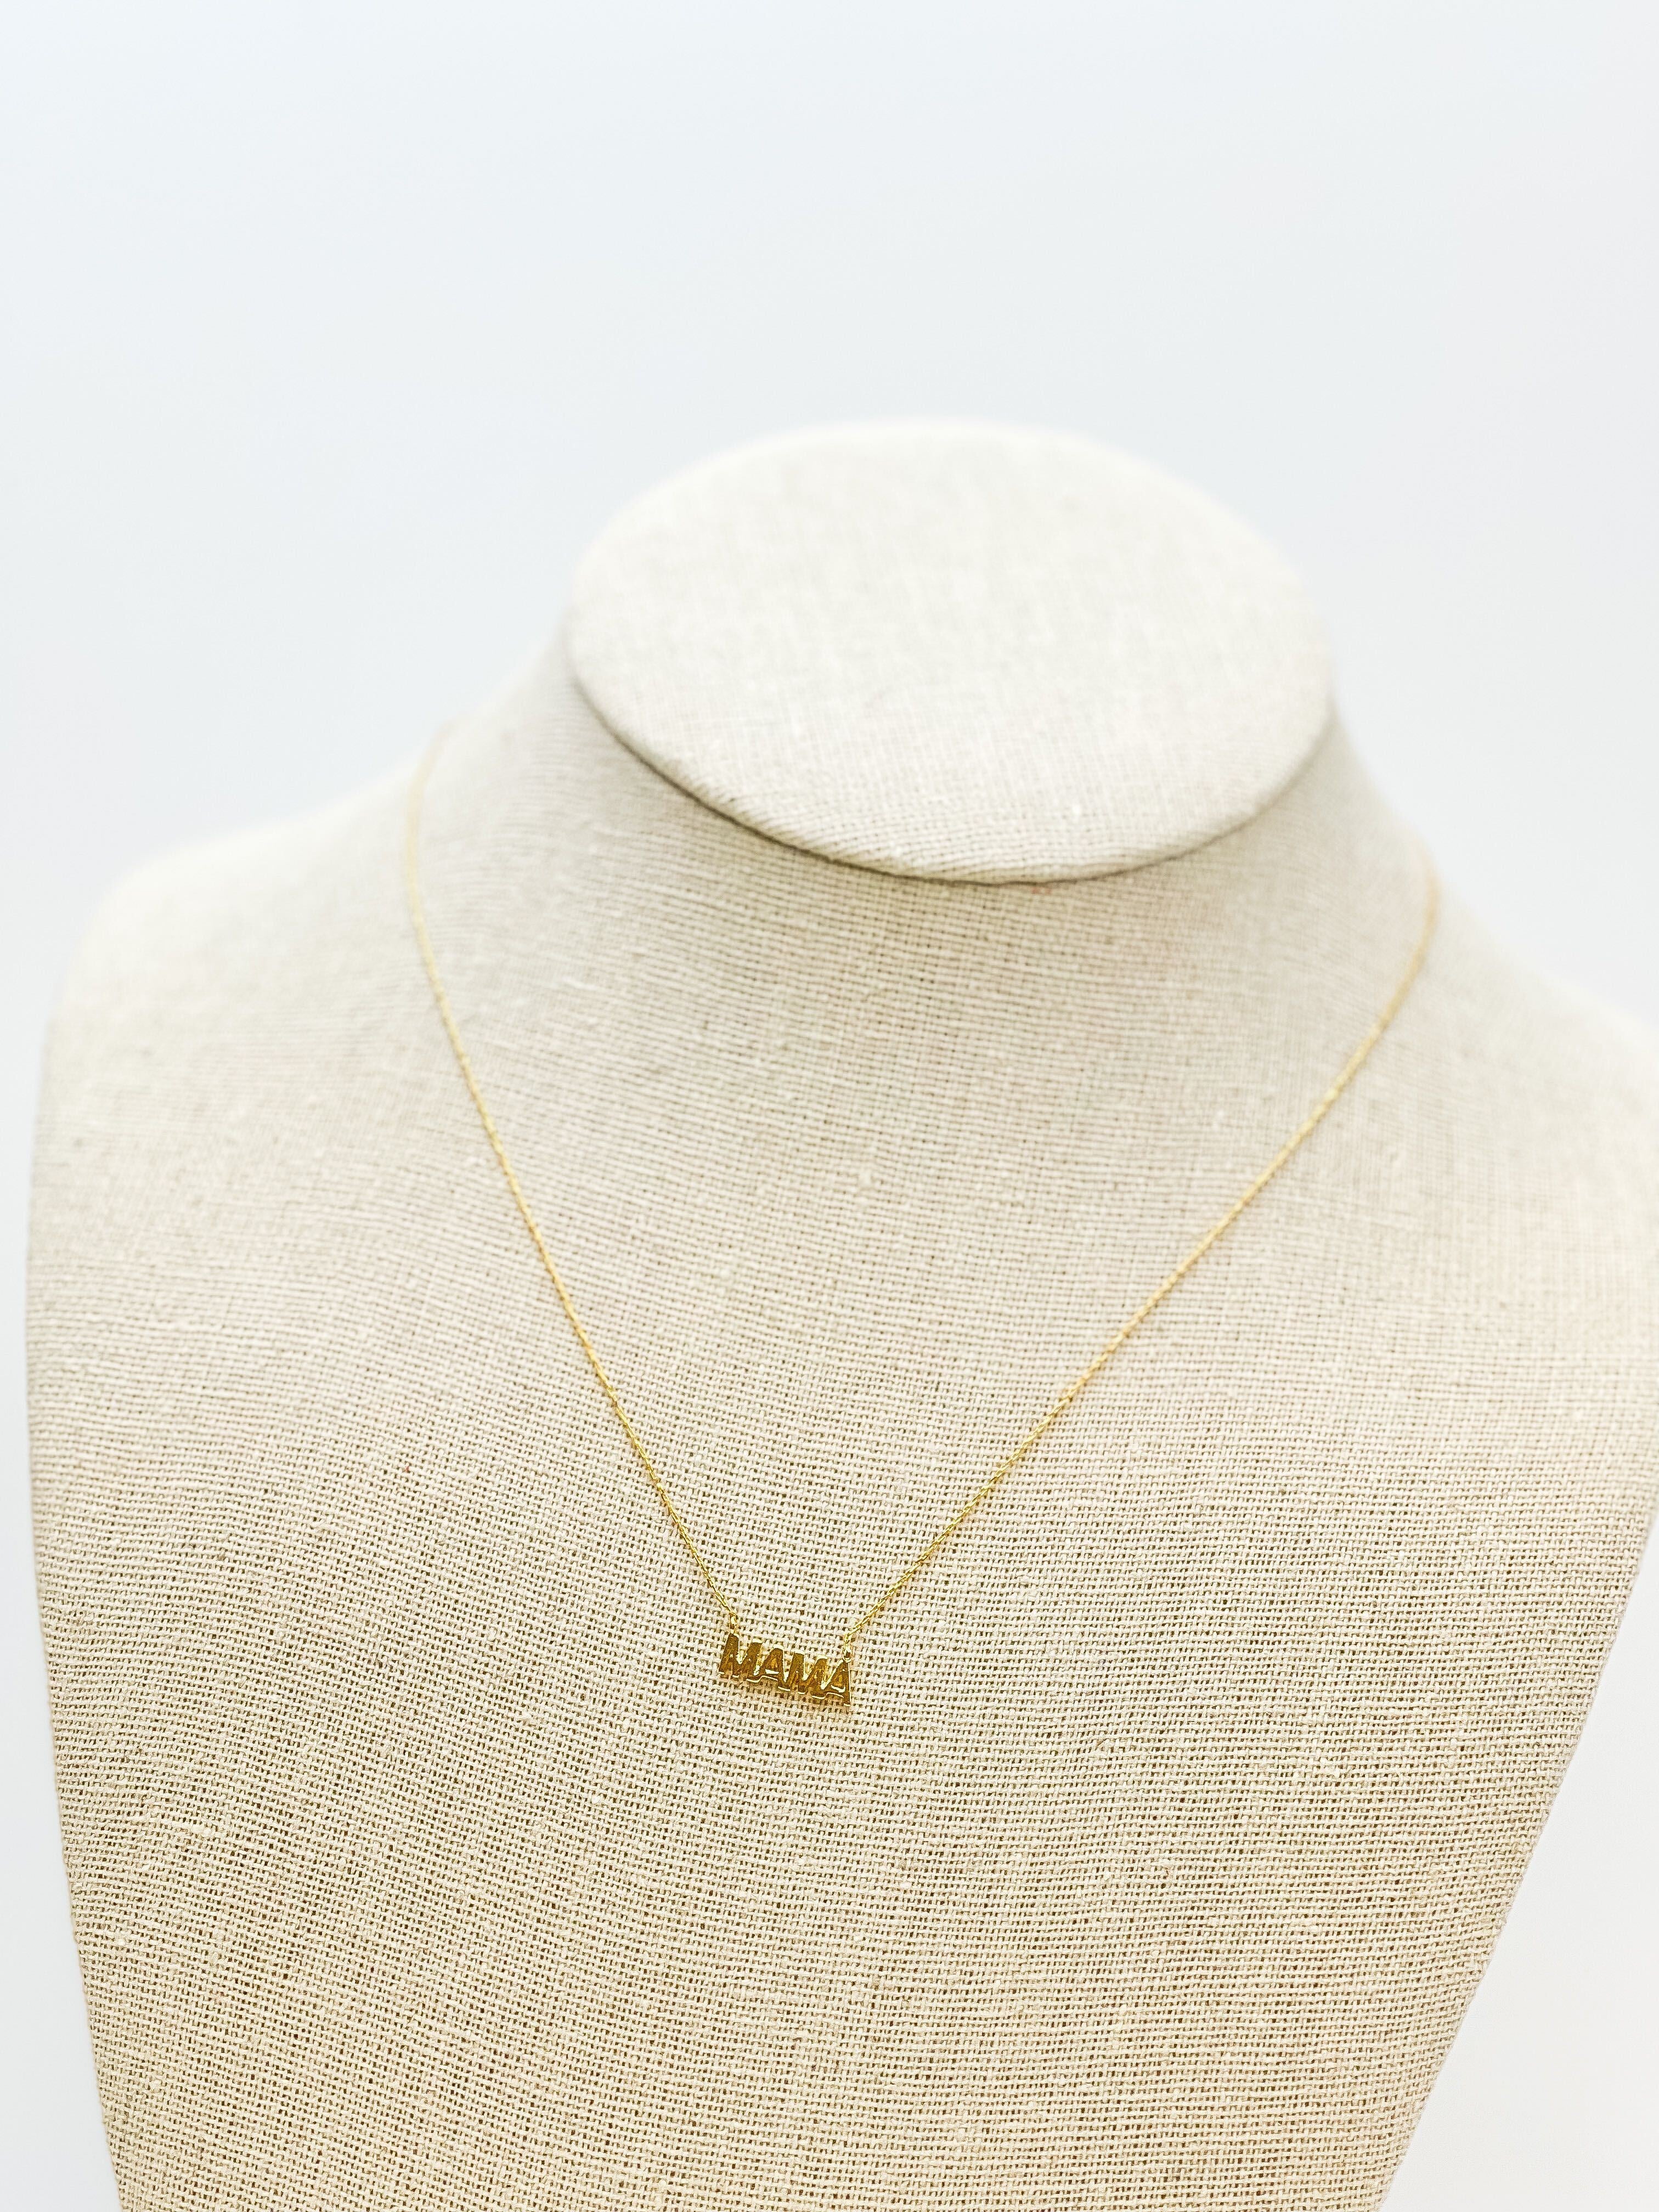 'MAMA' Gold Pendant Necklace